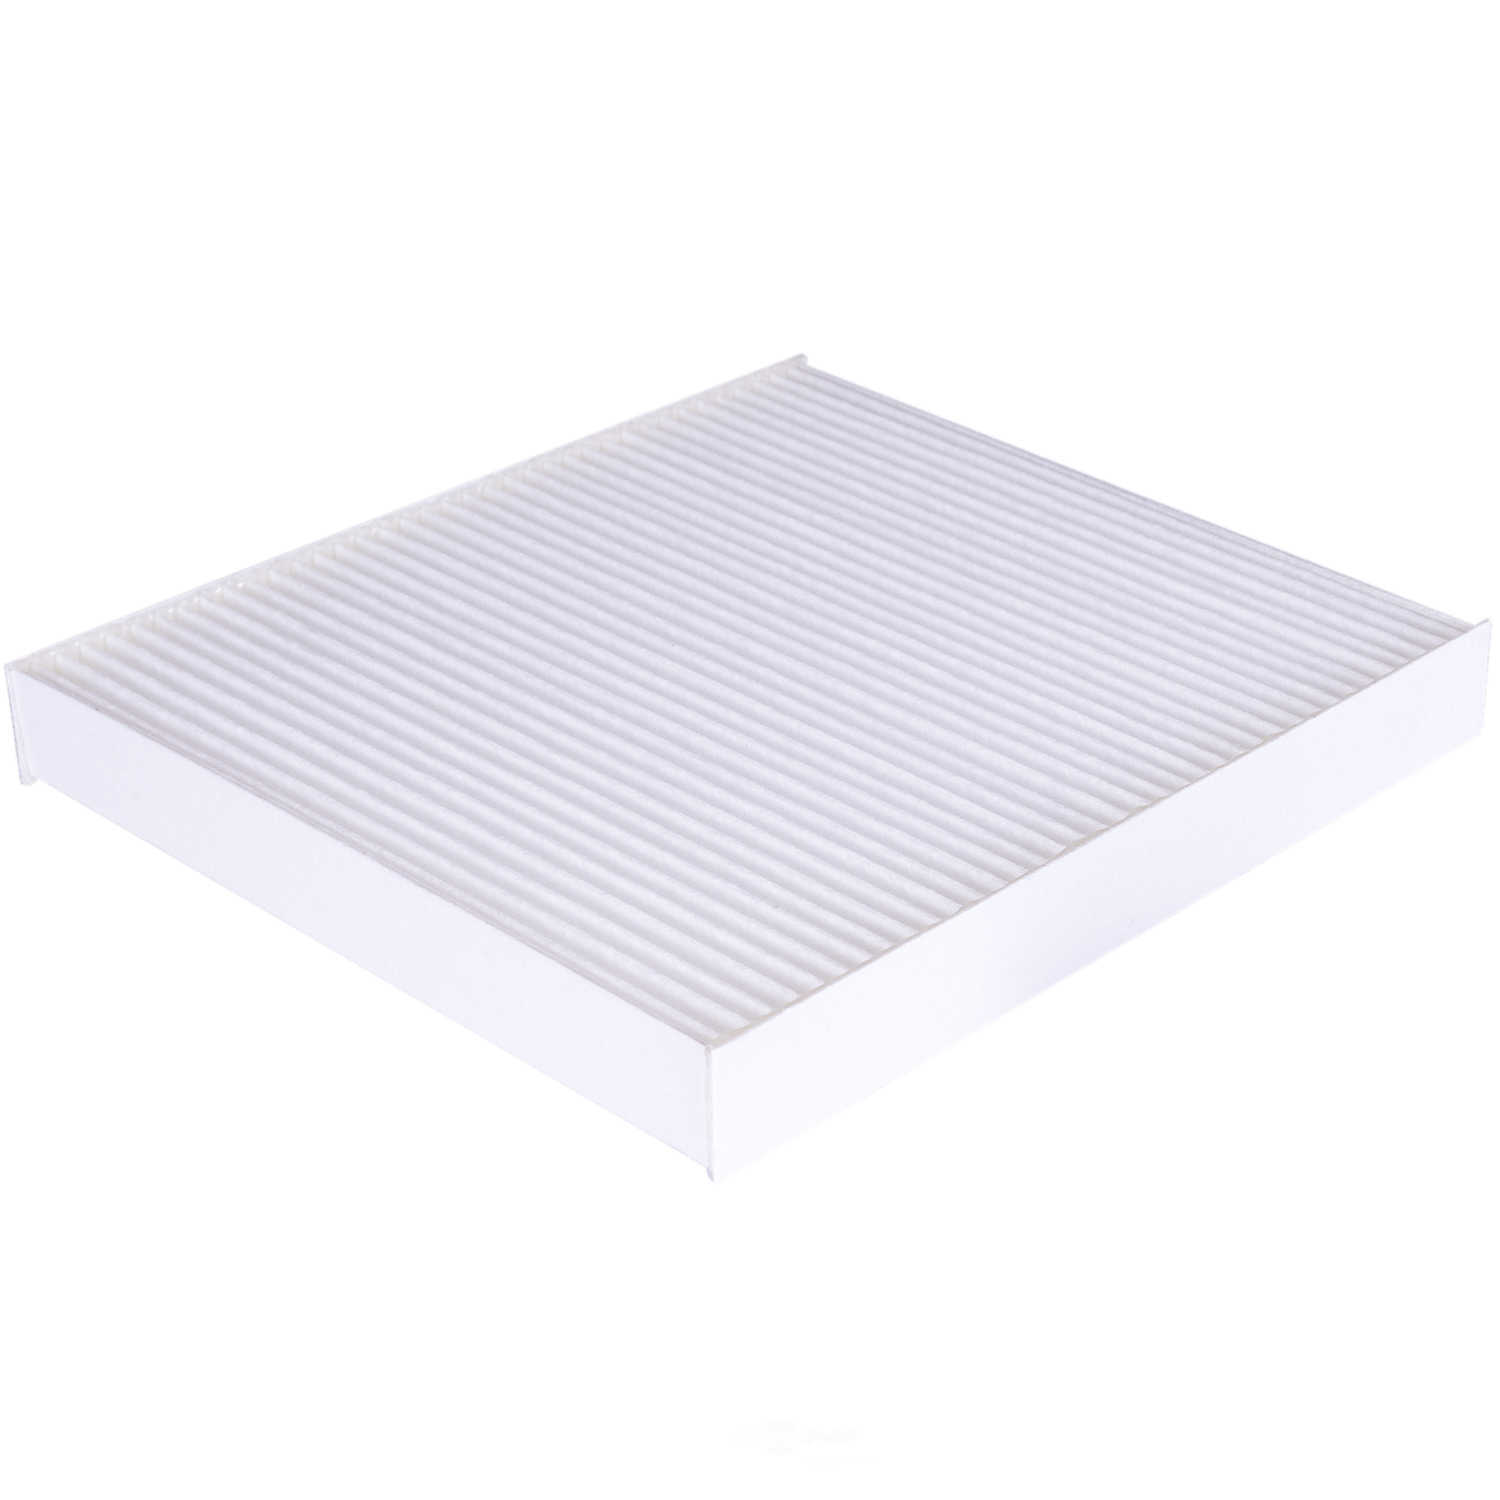 Cabin Air Filter fits 2007-2017 Jeep Compass,Patriot  DENSO